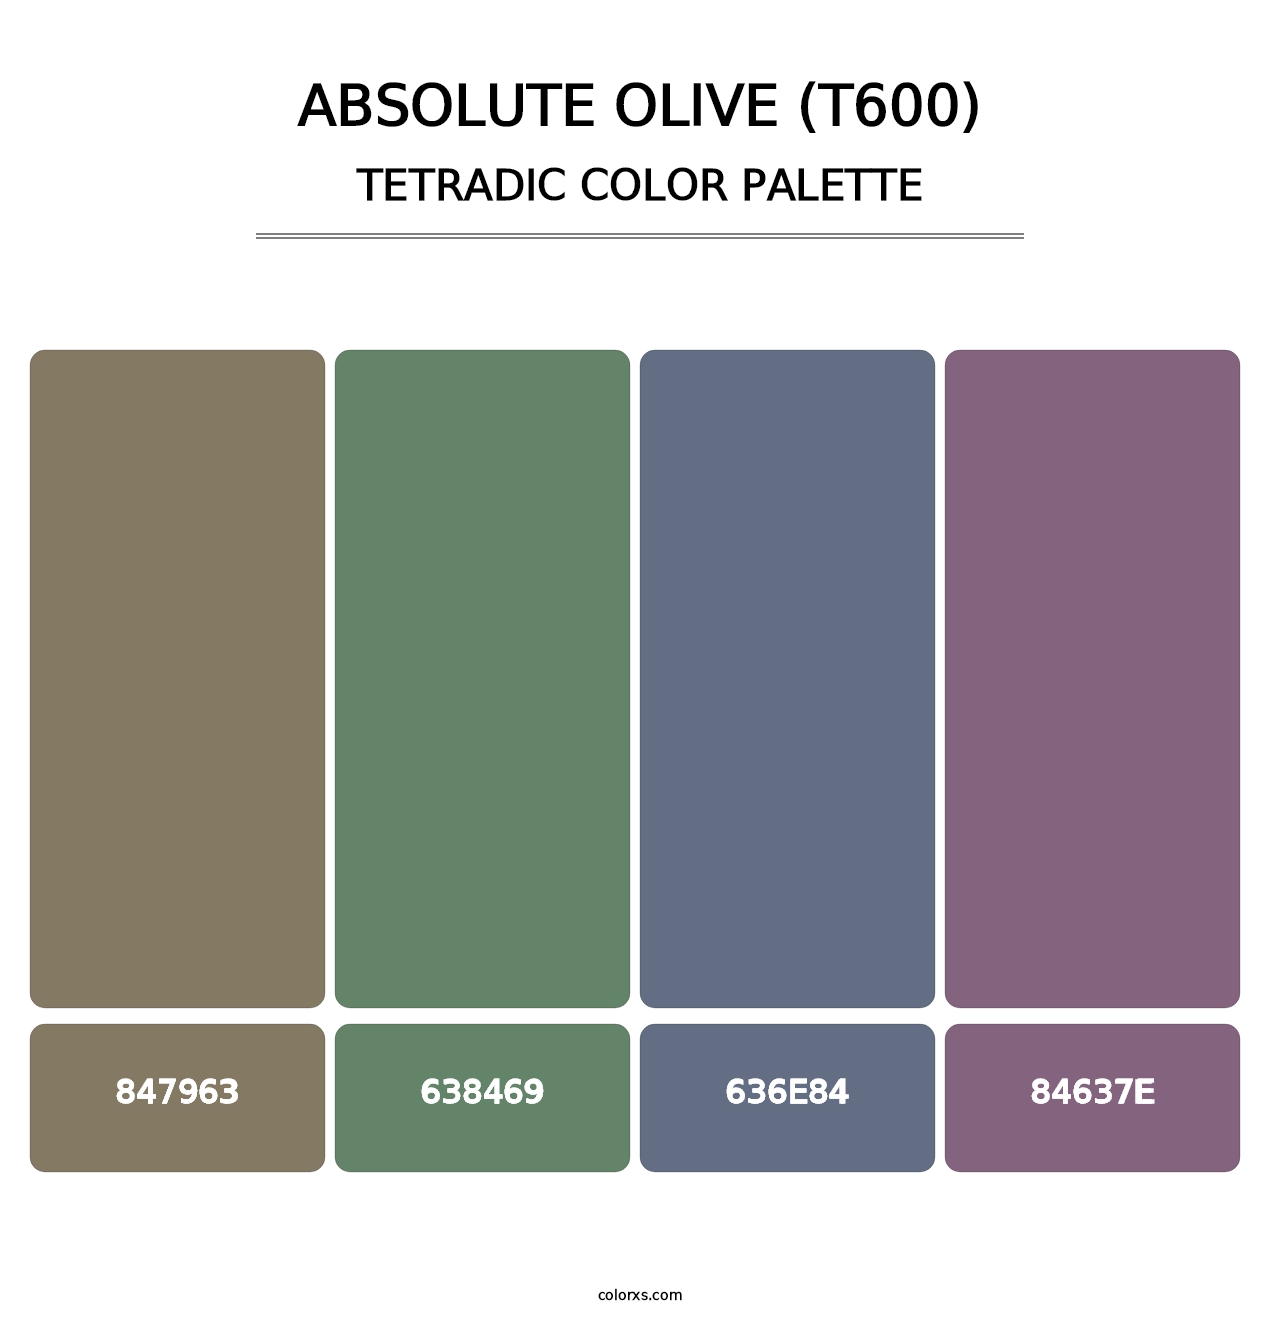 Absolute Olive (T600) - Tetradic Color Palette